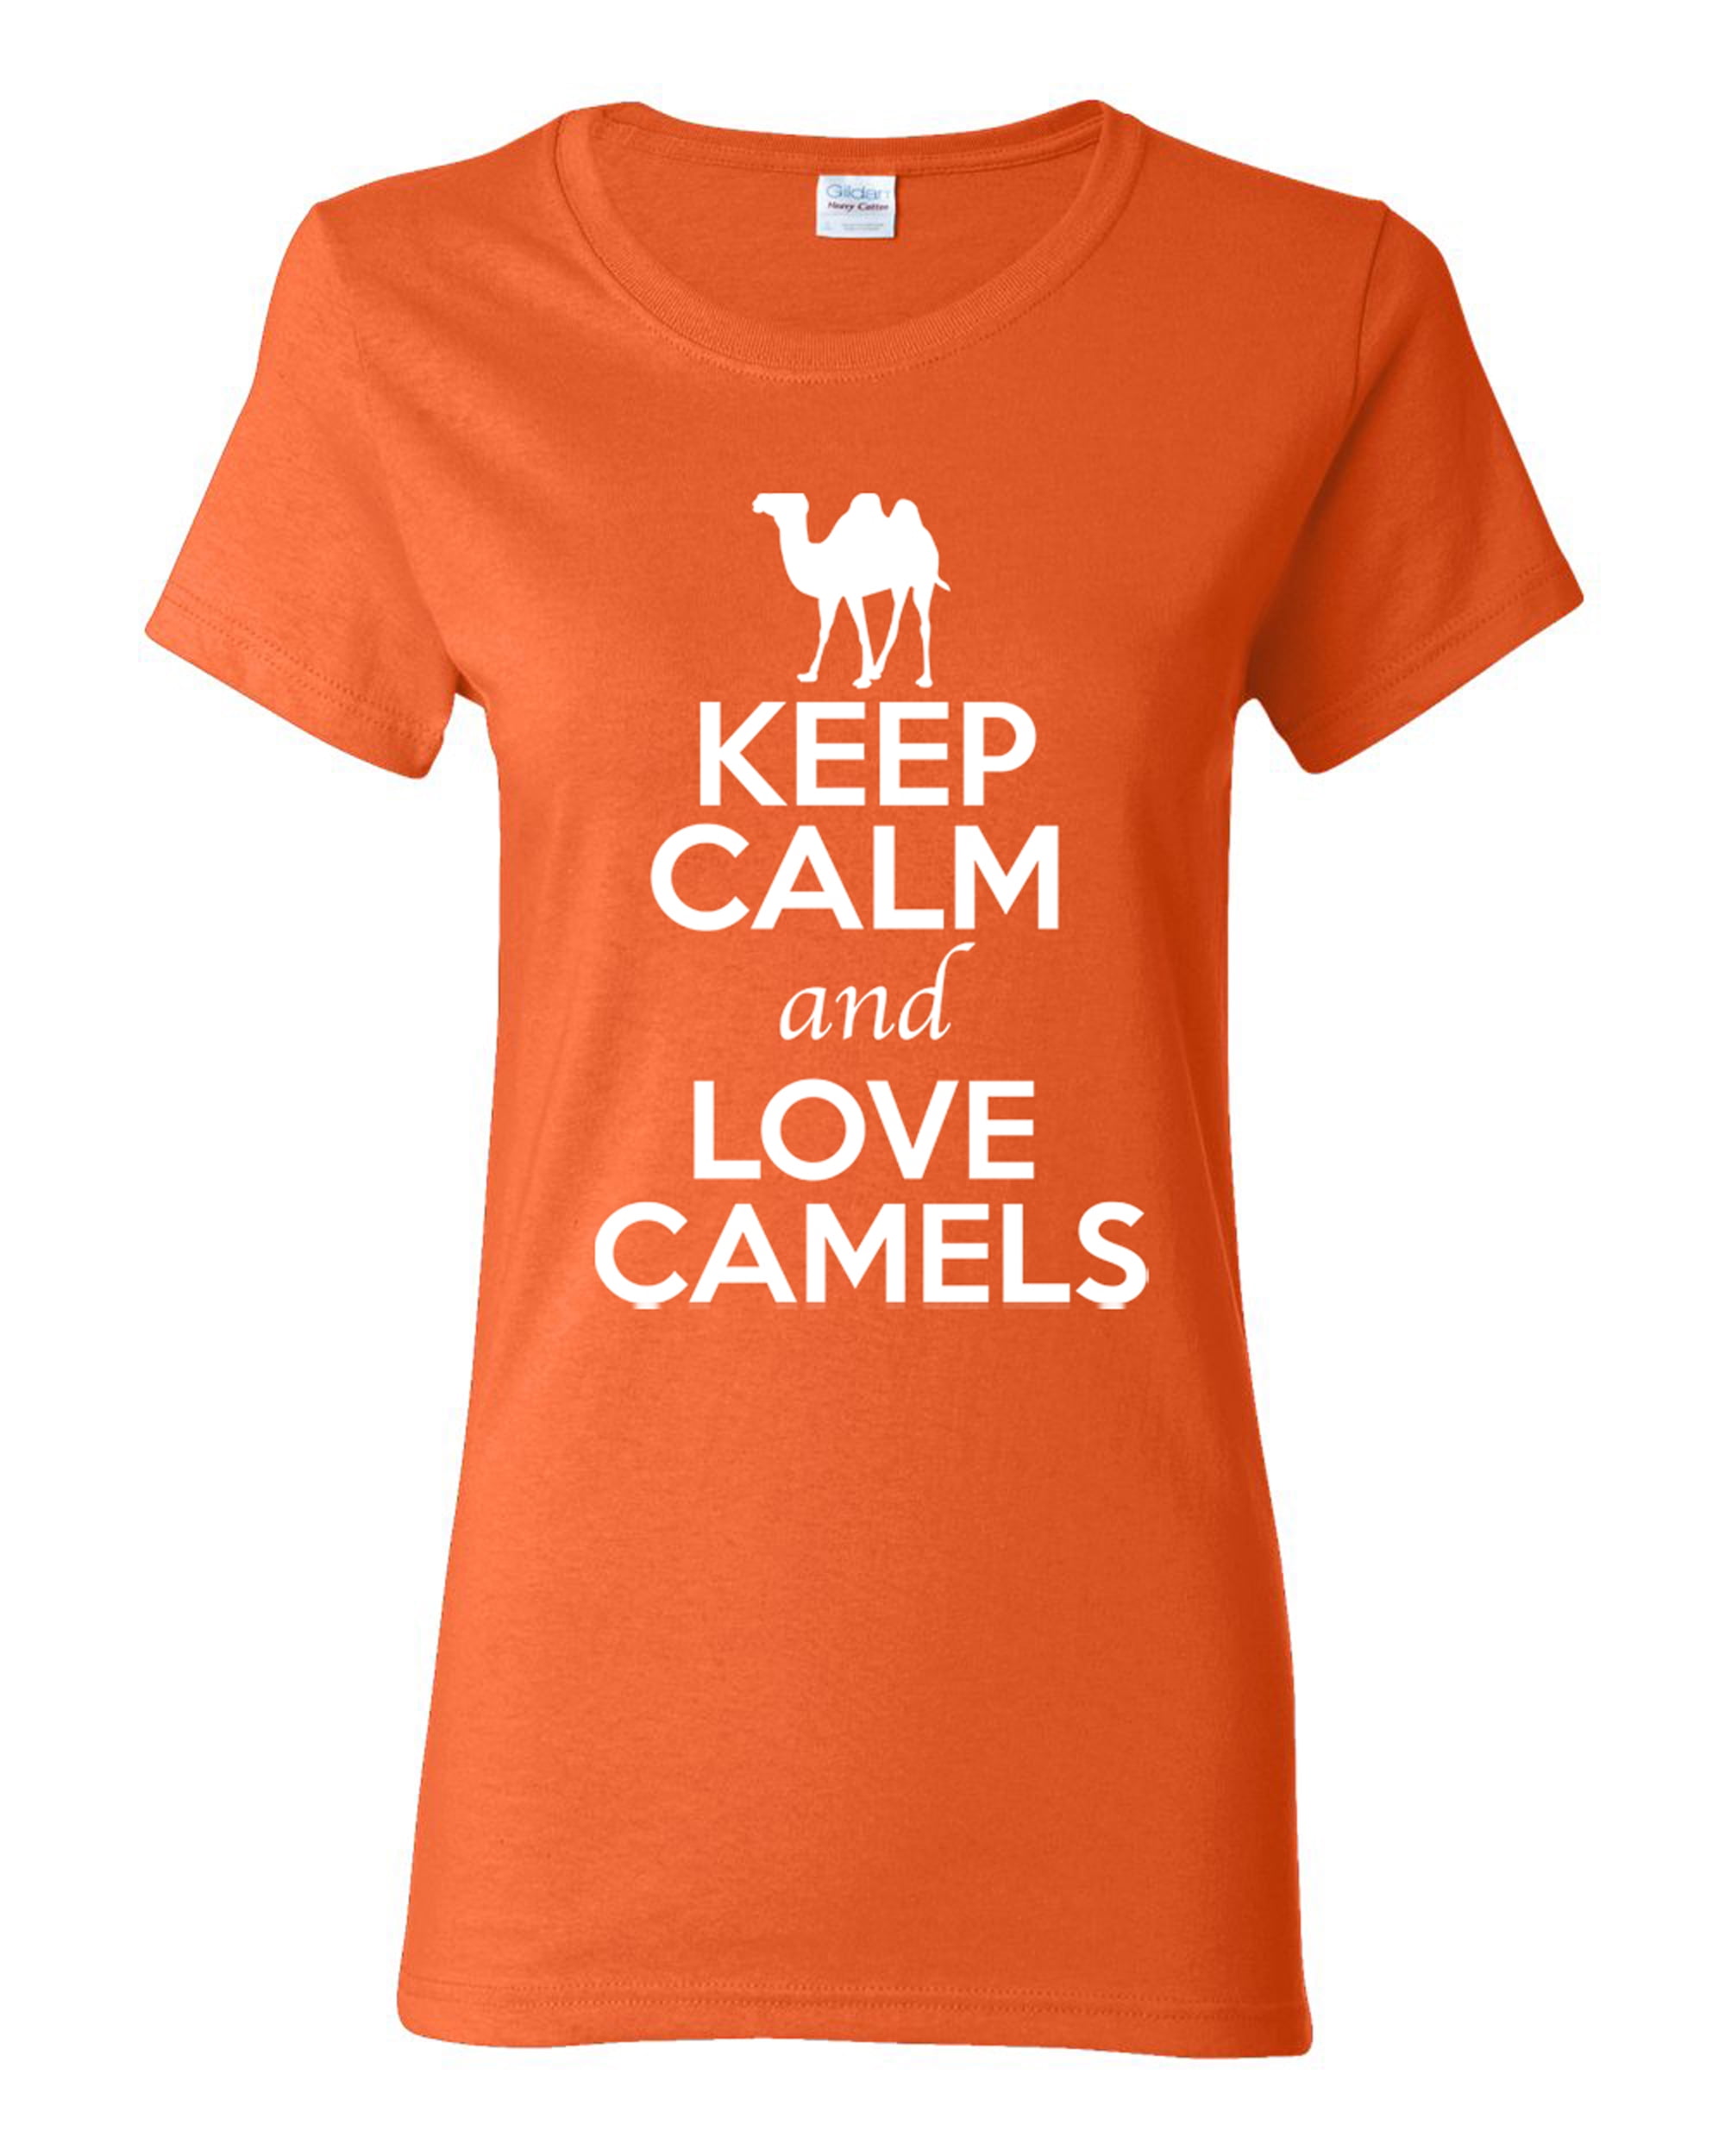 Keep Calm And Love Camels Desert Humps Wild Animal Lover Youth Kids T-Shirt Tee 